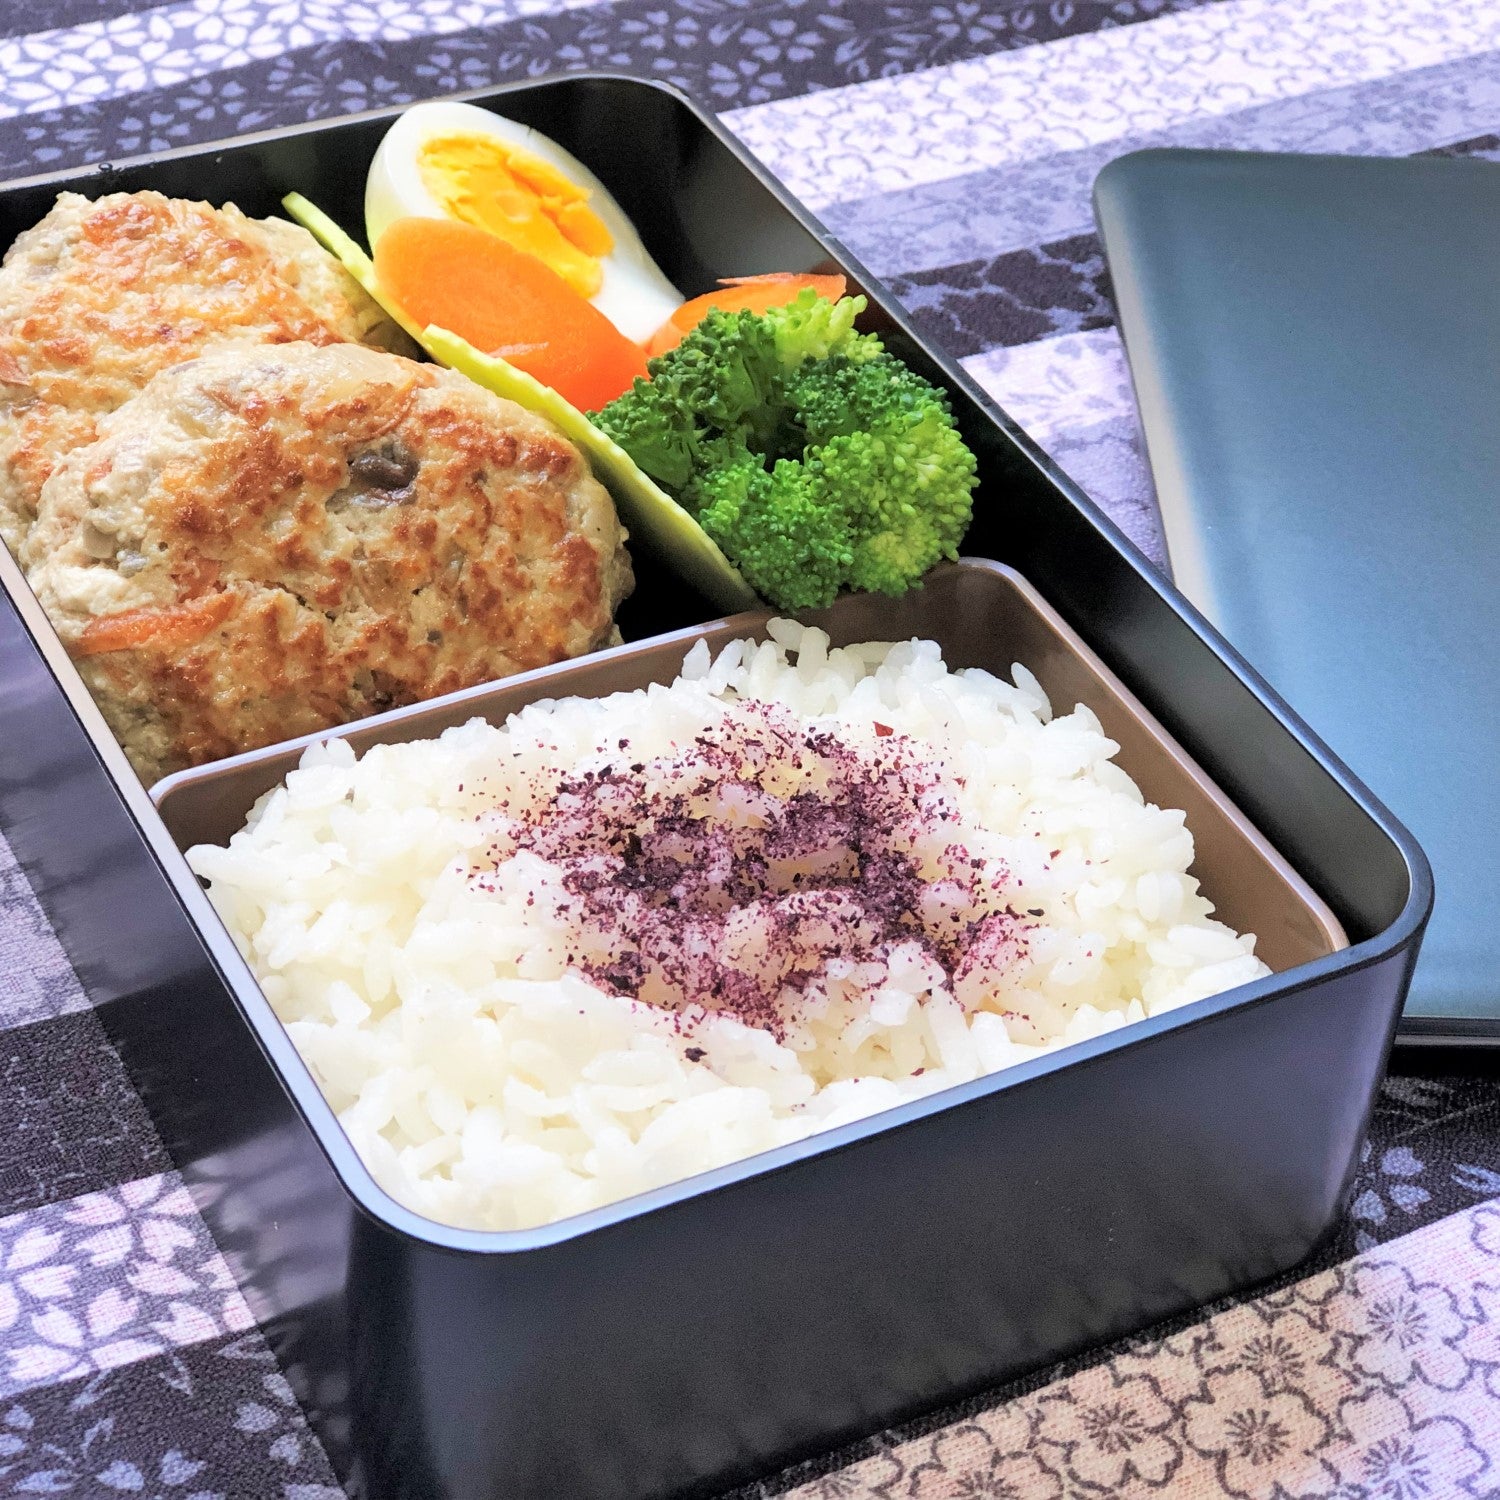 Majime Life Kuro 1 Tier Bento Box Japanese Bento Boxes for Adults Made in Japan Simple functional Bento Lunch boxes Microwave and Dishwasher safe black sleek design Rice and Hamburg bento box